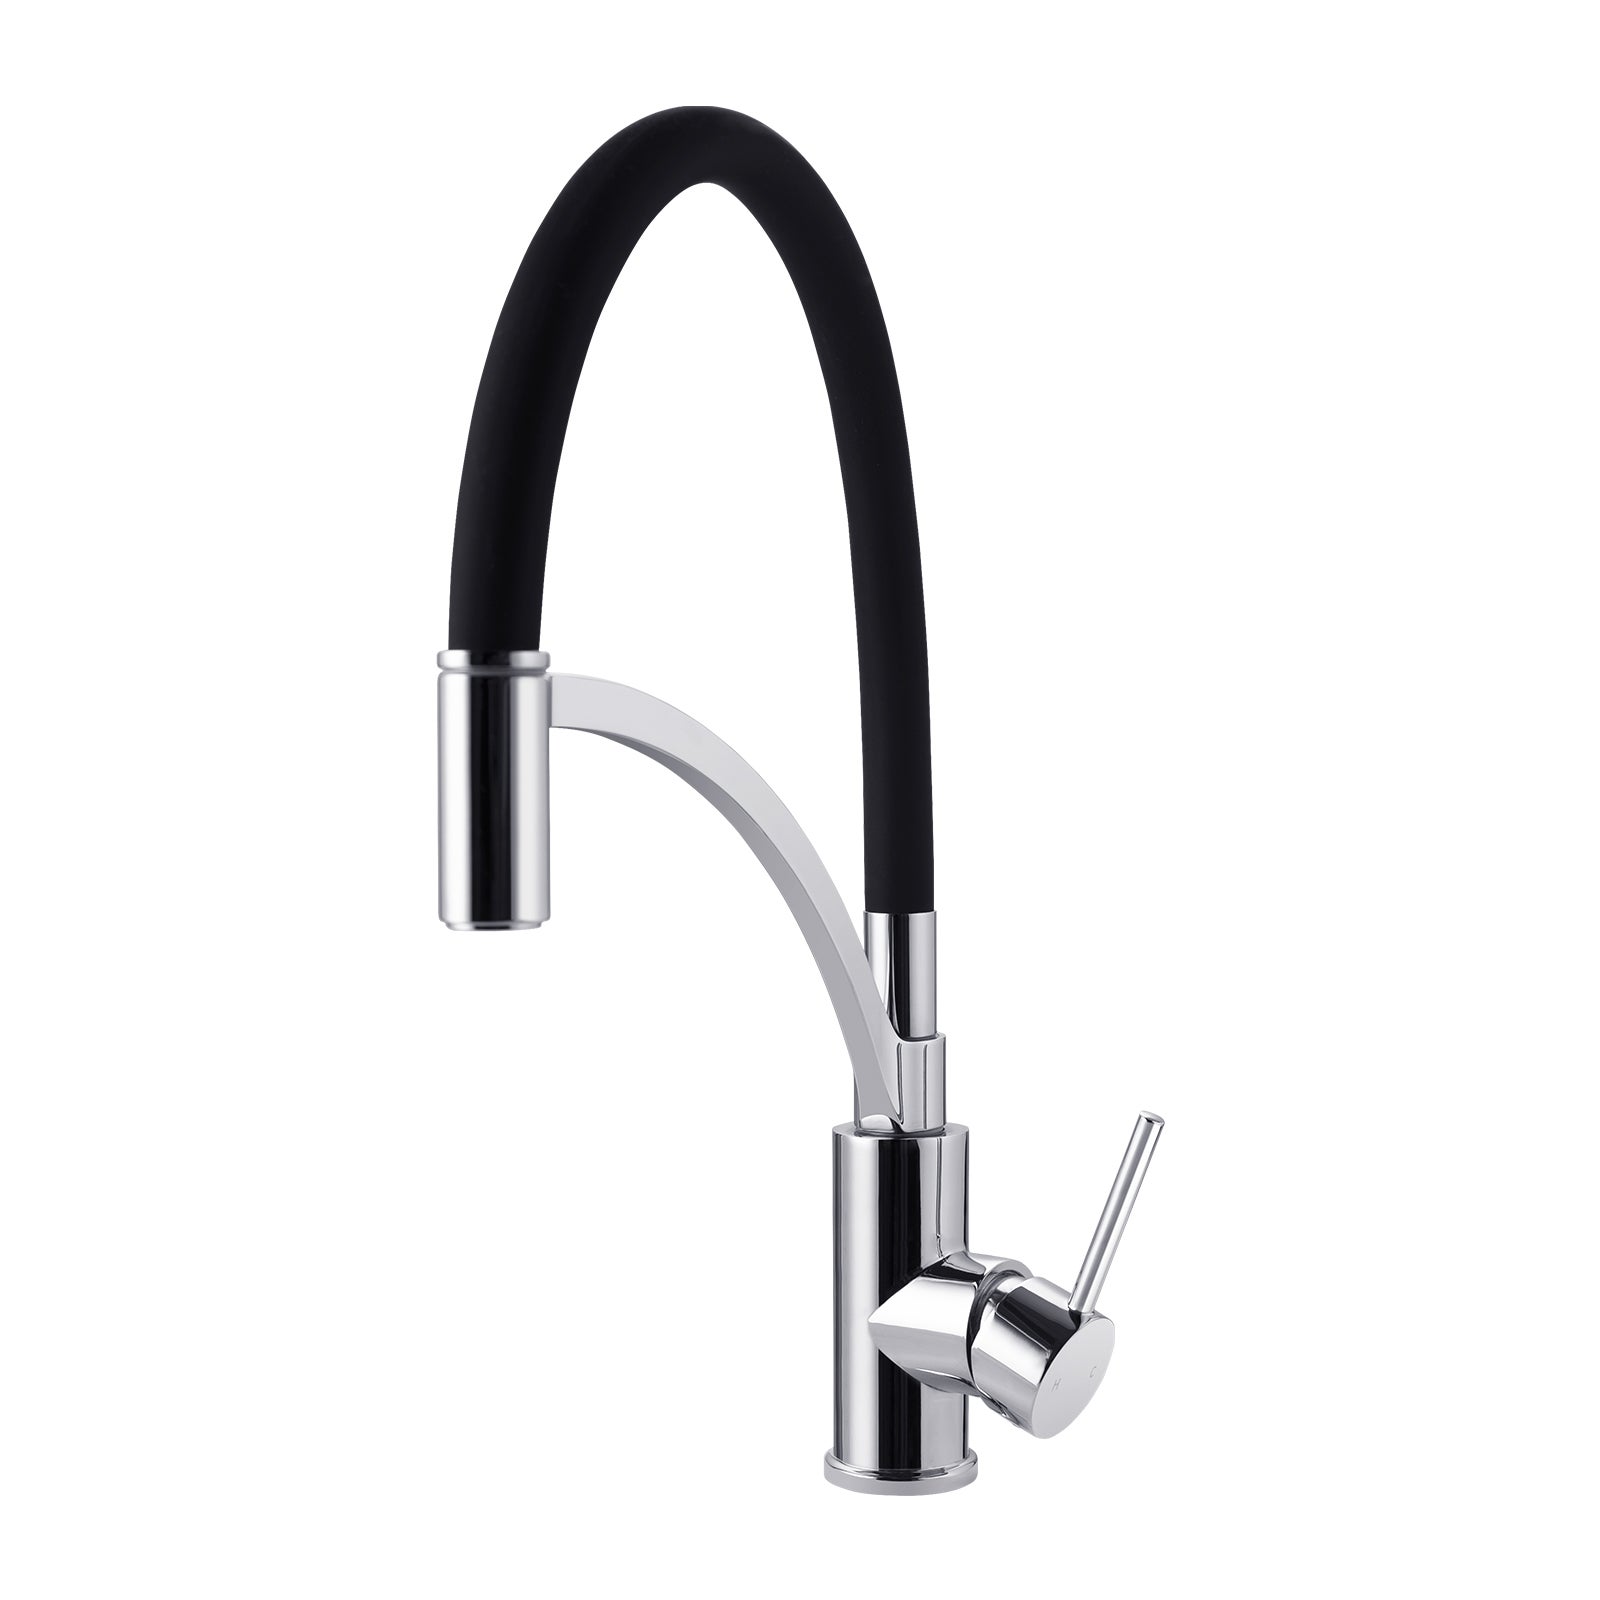 ACA Round Chrome Kitchen Tap Vanity Sink Swivel Pull Down Mixer Tap Faucet WELS